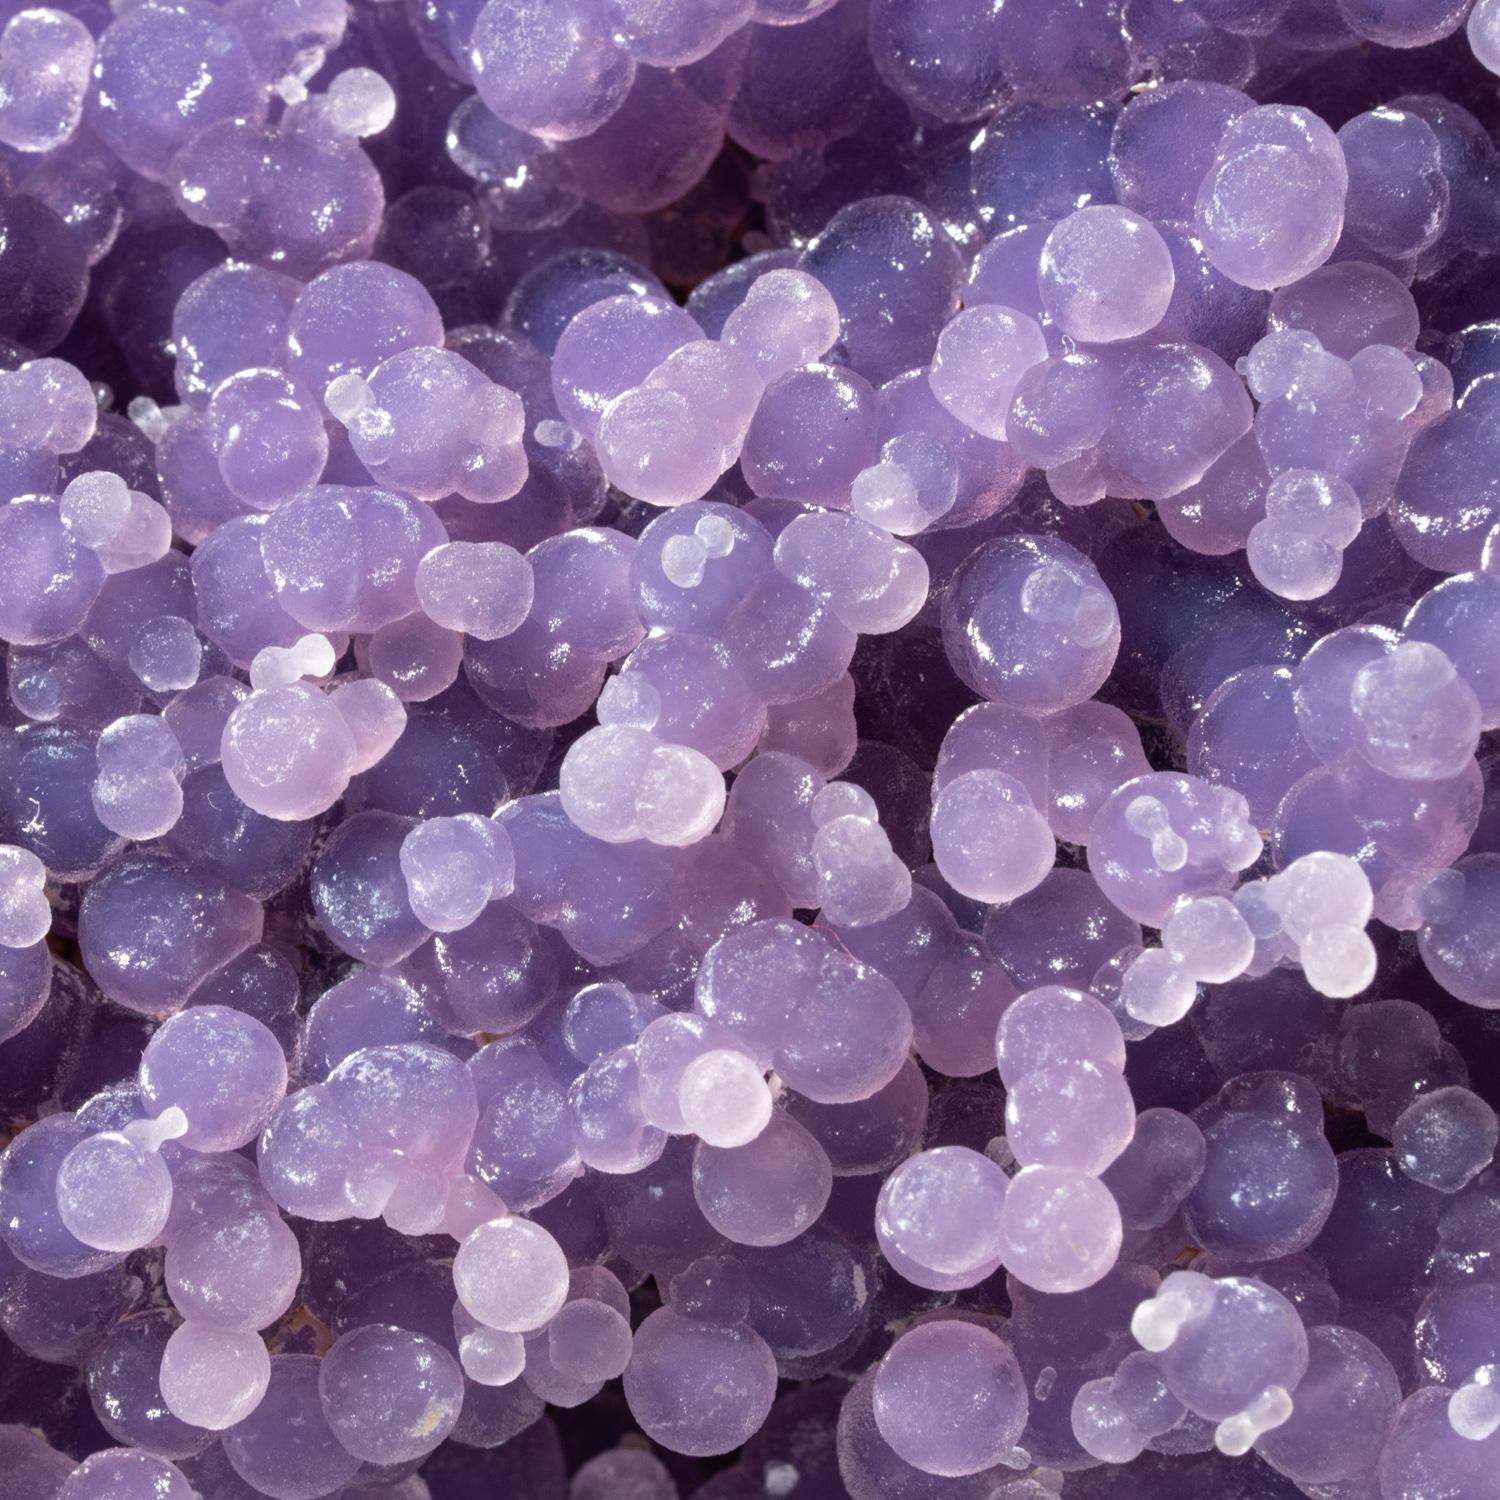 From near Pantai Manakarra, Mamuju, Sulawesi, Indonesia

Double-sided cluster of translucent grape purple quartz agate in spherical formations with a radial internal structure and are found in cavities in pillow basalt. Also known as Grape